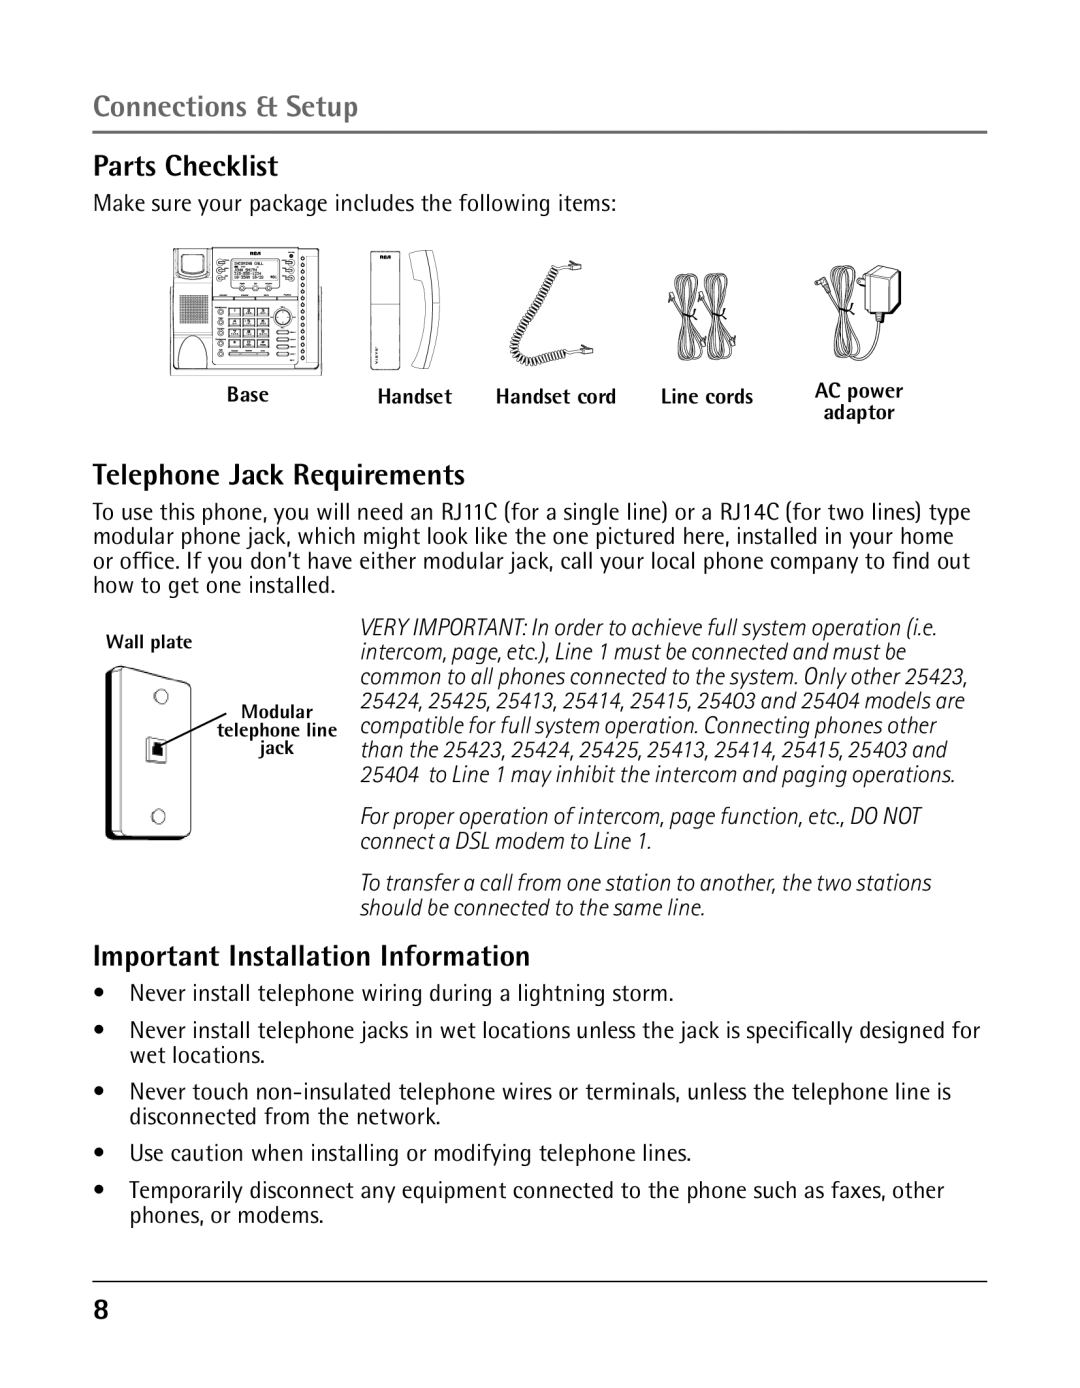 RCA 25425RE1A Parts Checklist, Telephone Jack Requirements, Important Installation Information, Connections & Setup 